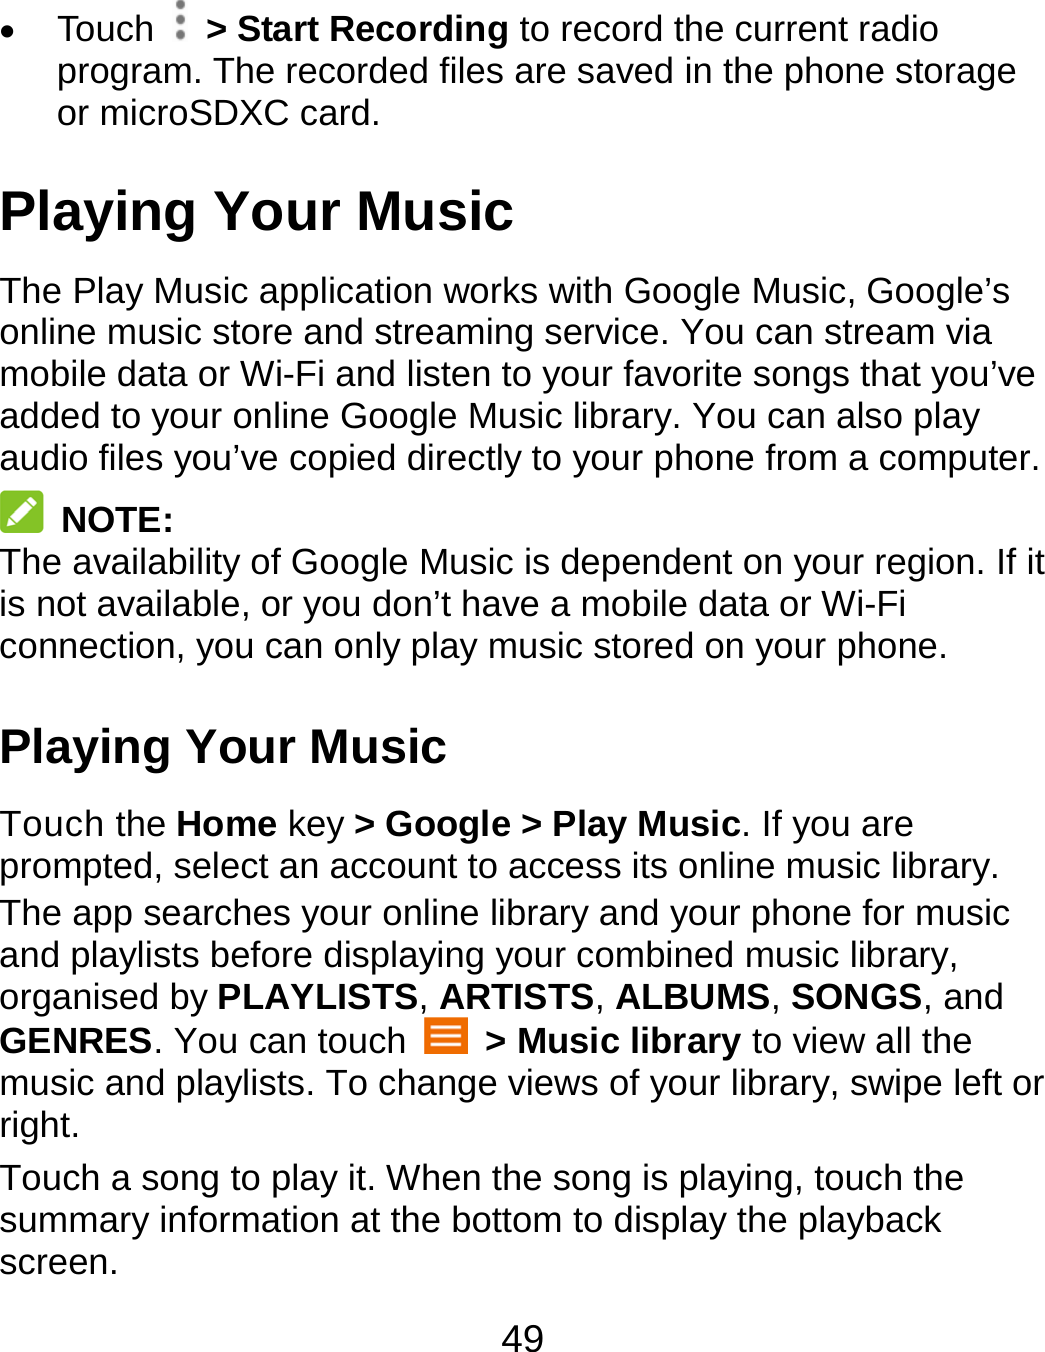 49  Touch   &gt; Start Recording to record the current radio program. The recorded files are saved in the phone storage or microSDXC card. Playing Your Music The Play Music application works with Google Music, Google’s online music store and streaming service. You can stream via mobile data or Wi-Fi and listen to your favorite songs that you’ve added to your online Google Music library. You can also play audio files you’ve copied directly to your phone from a computer.  NOTE: The availability of Google Music is dependent on your region. If it is not available, or you don’t have a mobile data or Wi-Fi connection, you can only play music stored on your phone. Playing Your Music Touch the Home key &gt; Google &gt; Play Music. If you are prompted, select an account to access its online music library. The app searches your online library and your phone for music and playlists before displaying your combined music library, organised by PLAYLISTS, ARTISTS, ALBUMS, SONGS, and GENRES. You can touch   &gt; Music library to view all the music and playlists. To change views of your library, swipe left or right. Touch a song to play it. When the song is playing, touch the summary information at the bottom to display the playback screen. 